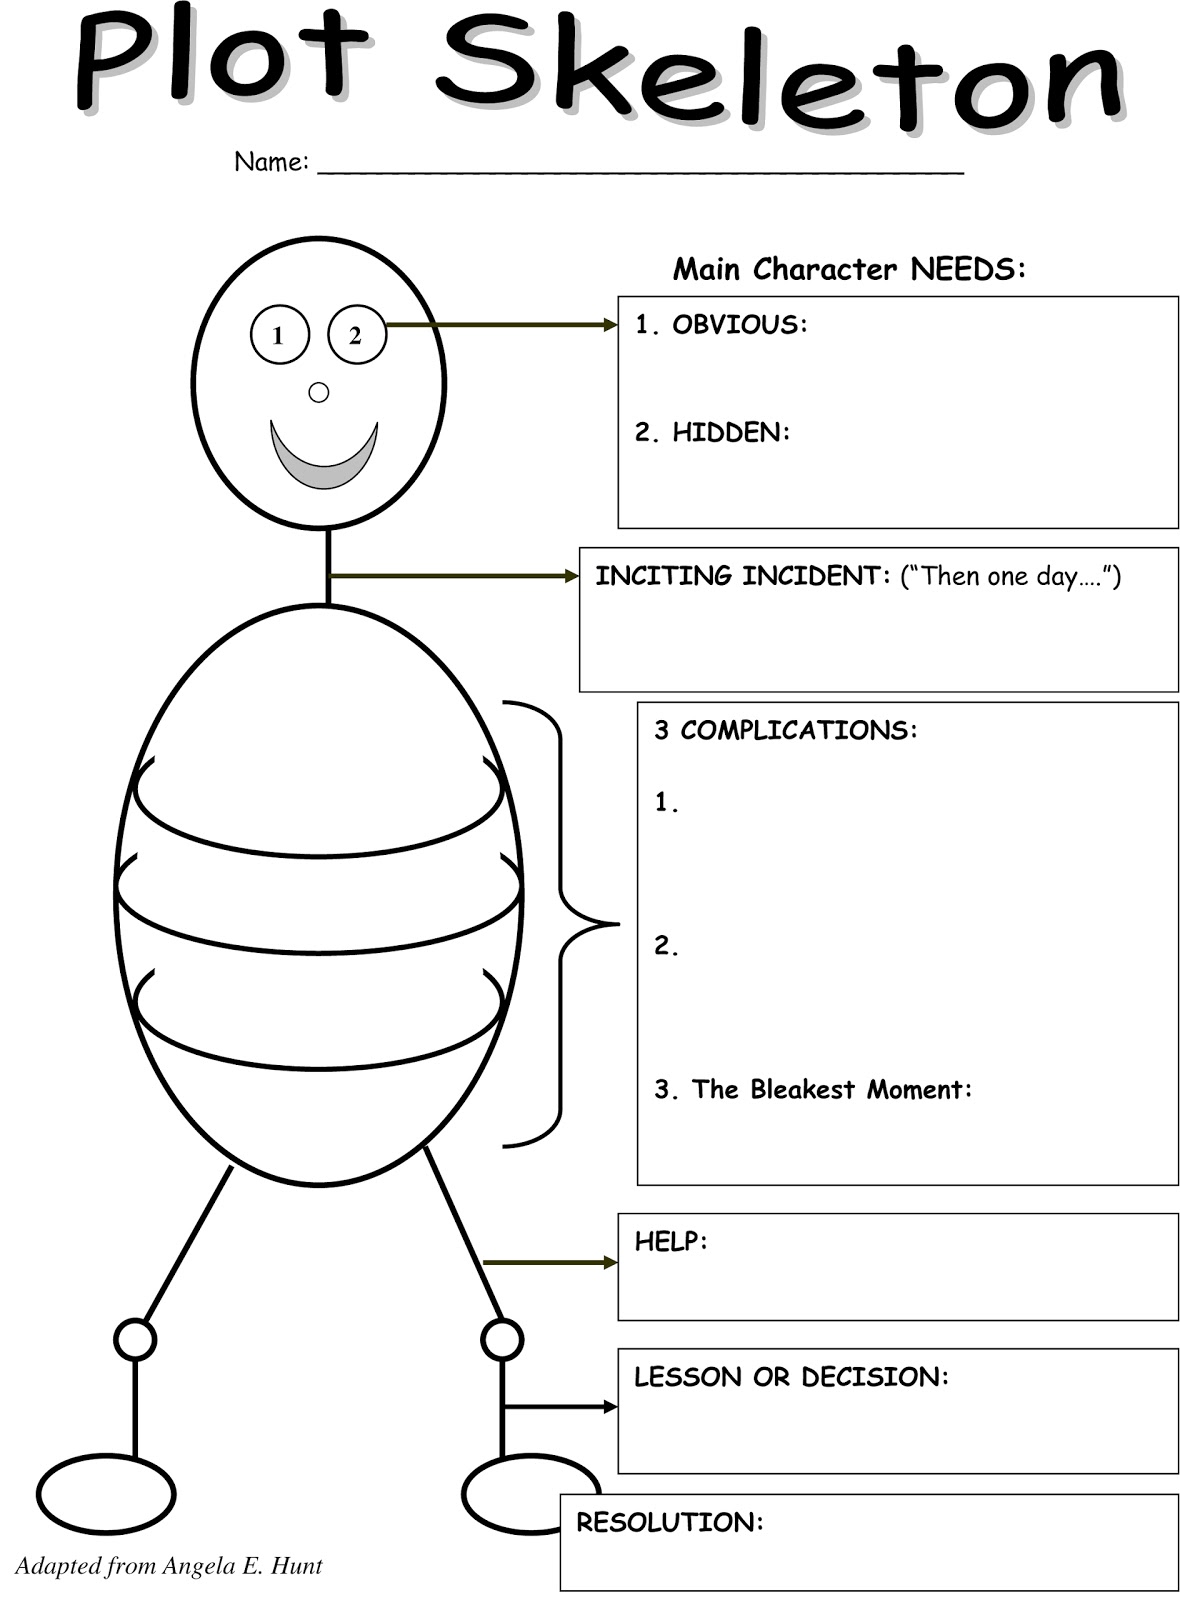 13 Best Images of Book Study Worksheets - Free Character Traits